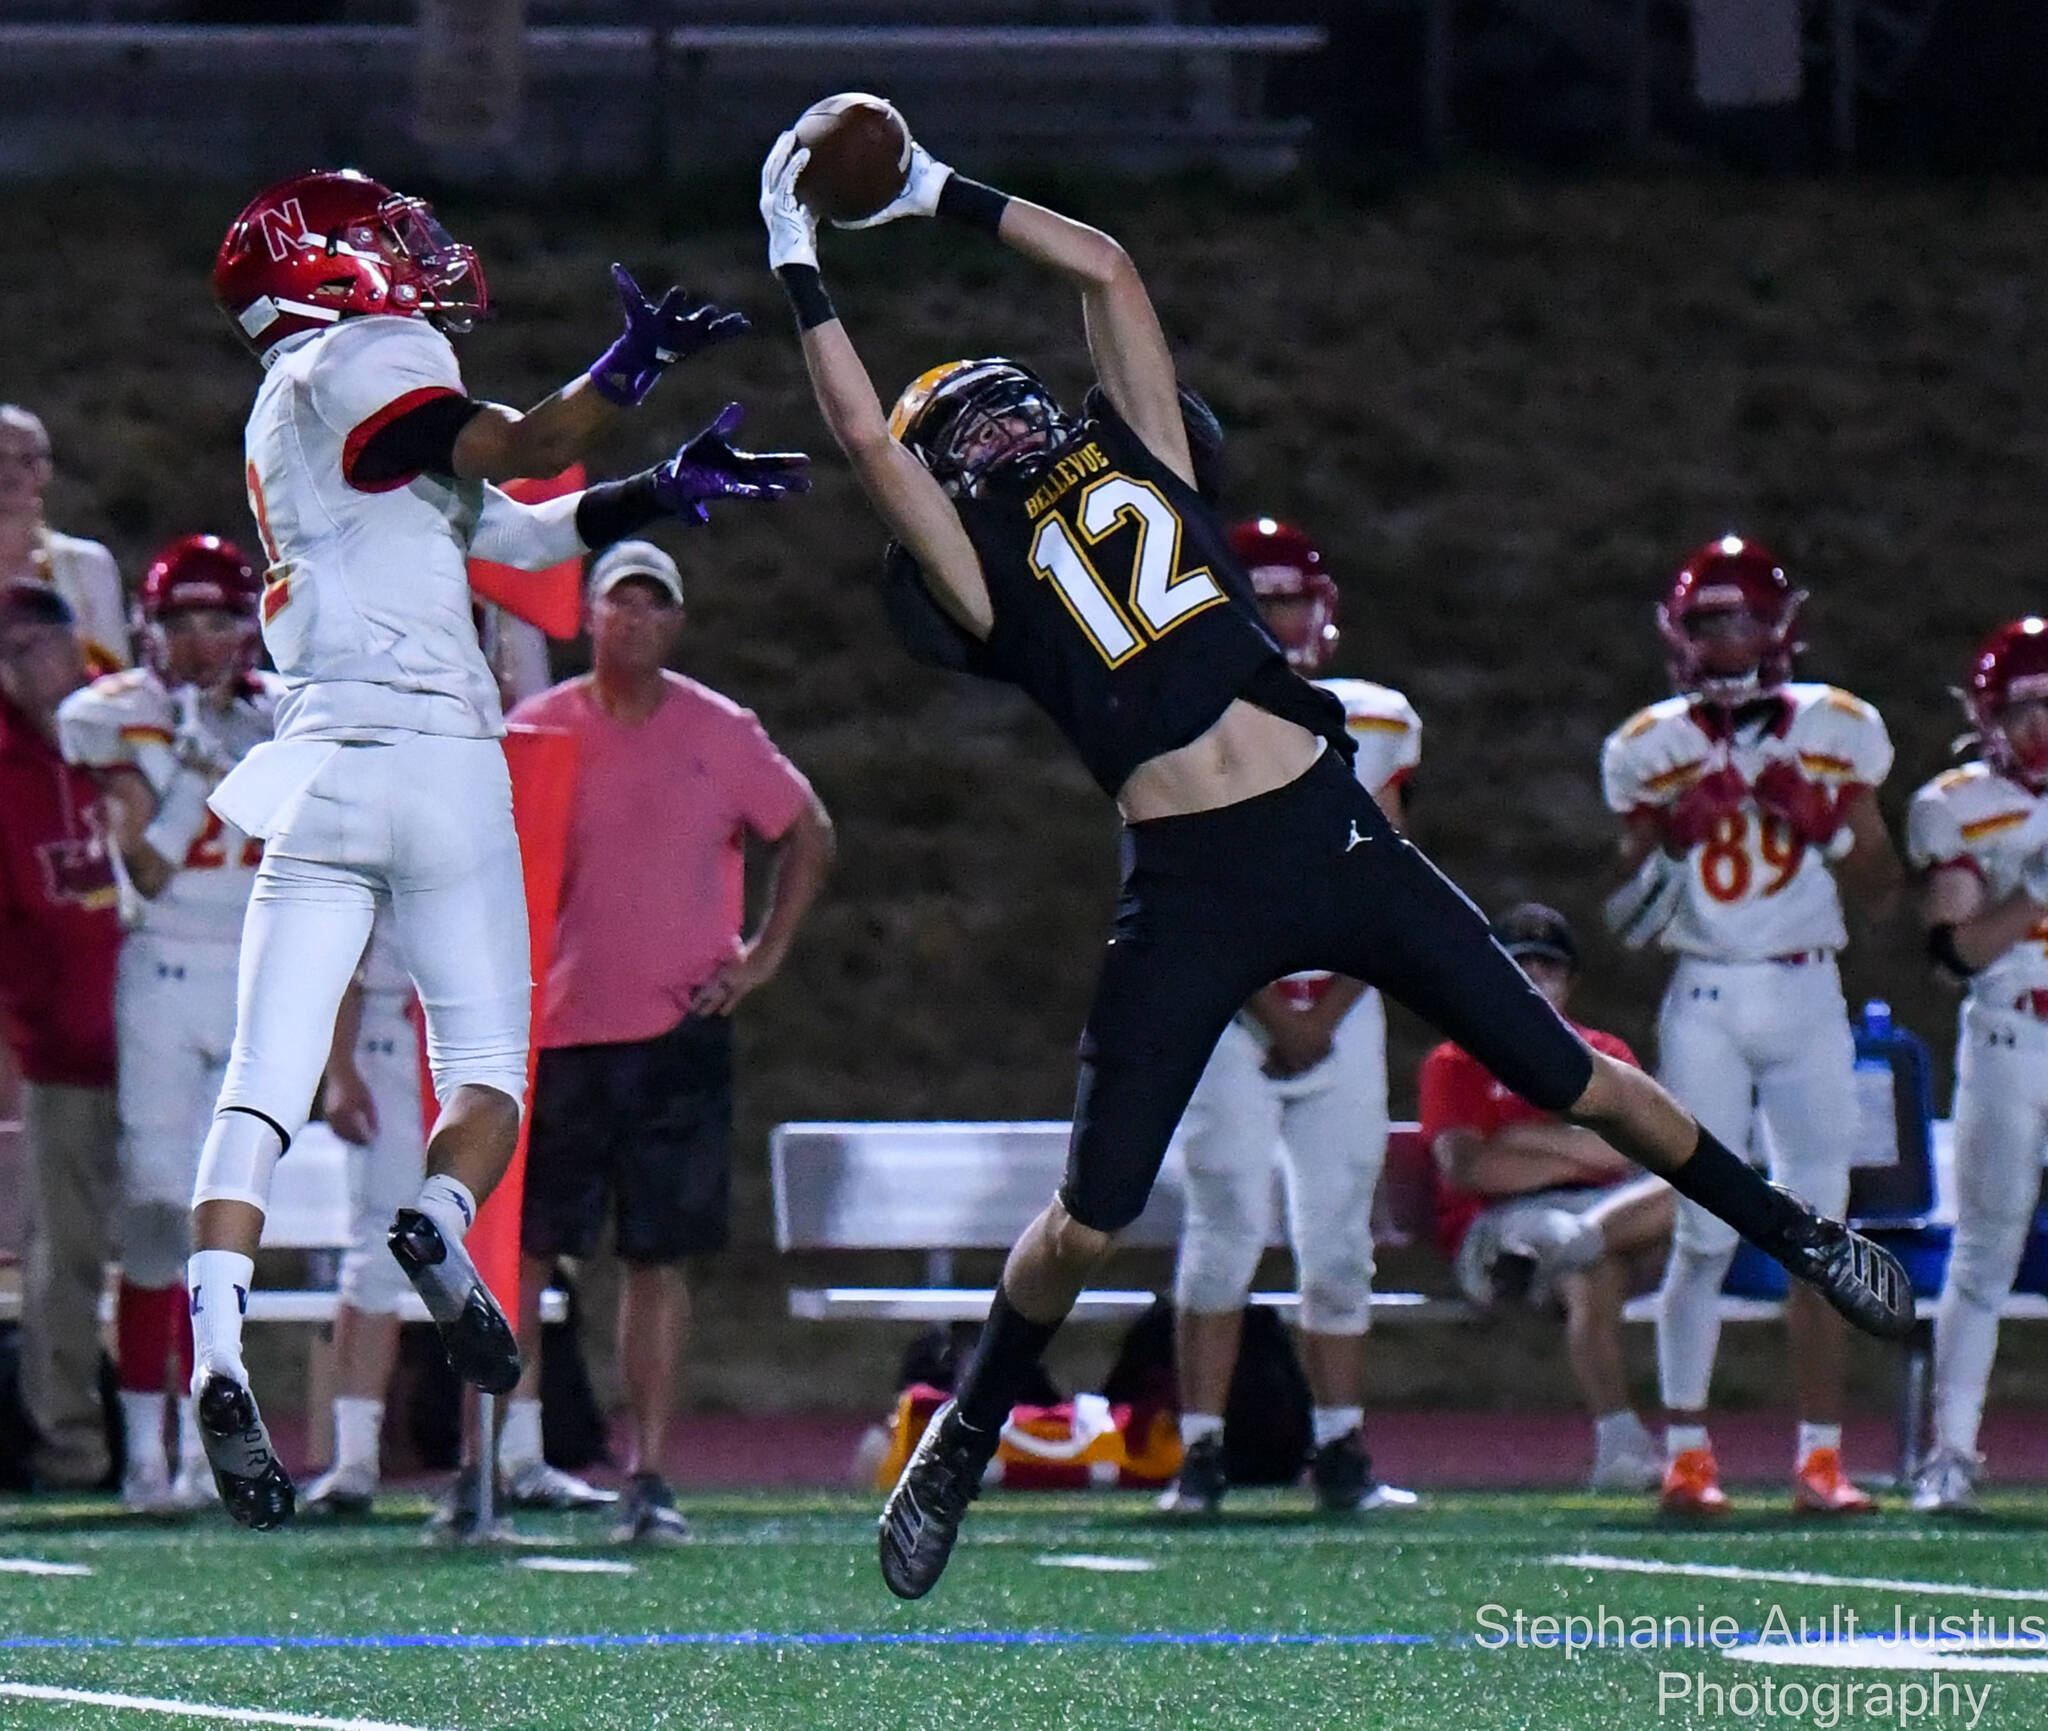 Bellevue High School’s sophomore, Bryce Smith (#12), intercepts the football from Newport junior Matthew Lee (#2). Courtesy of Stephanie Ault Justus.